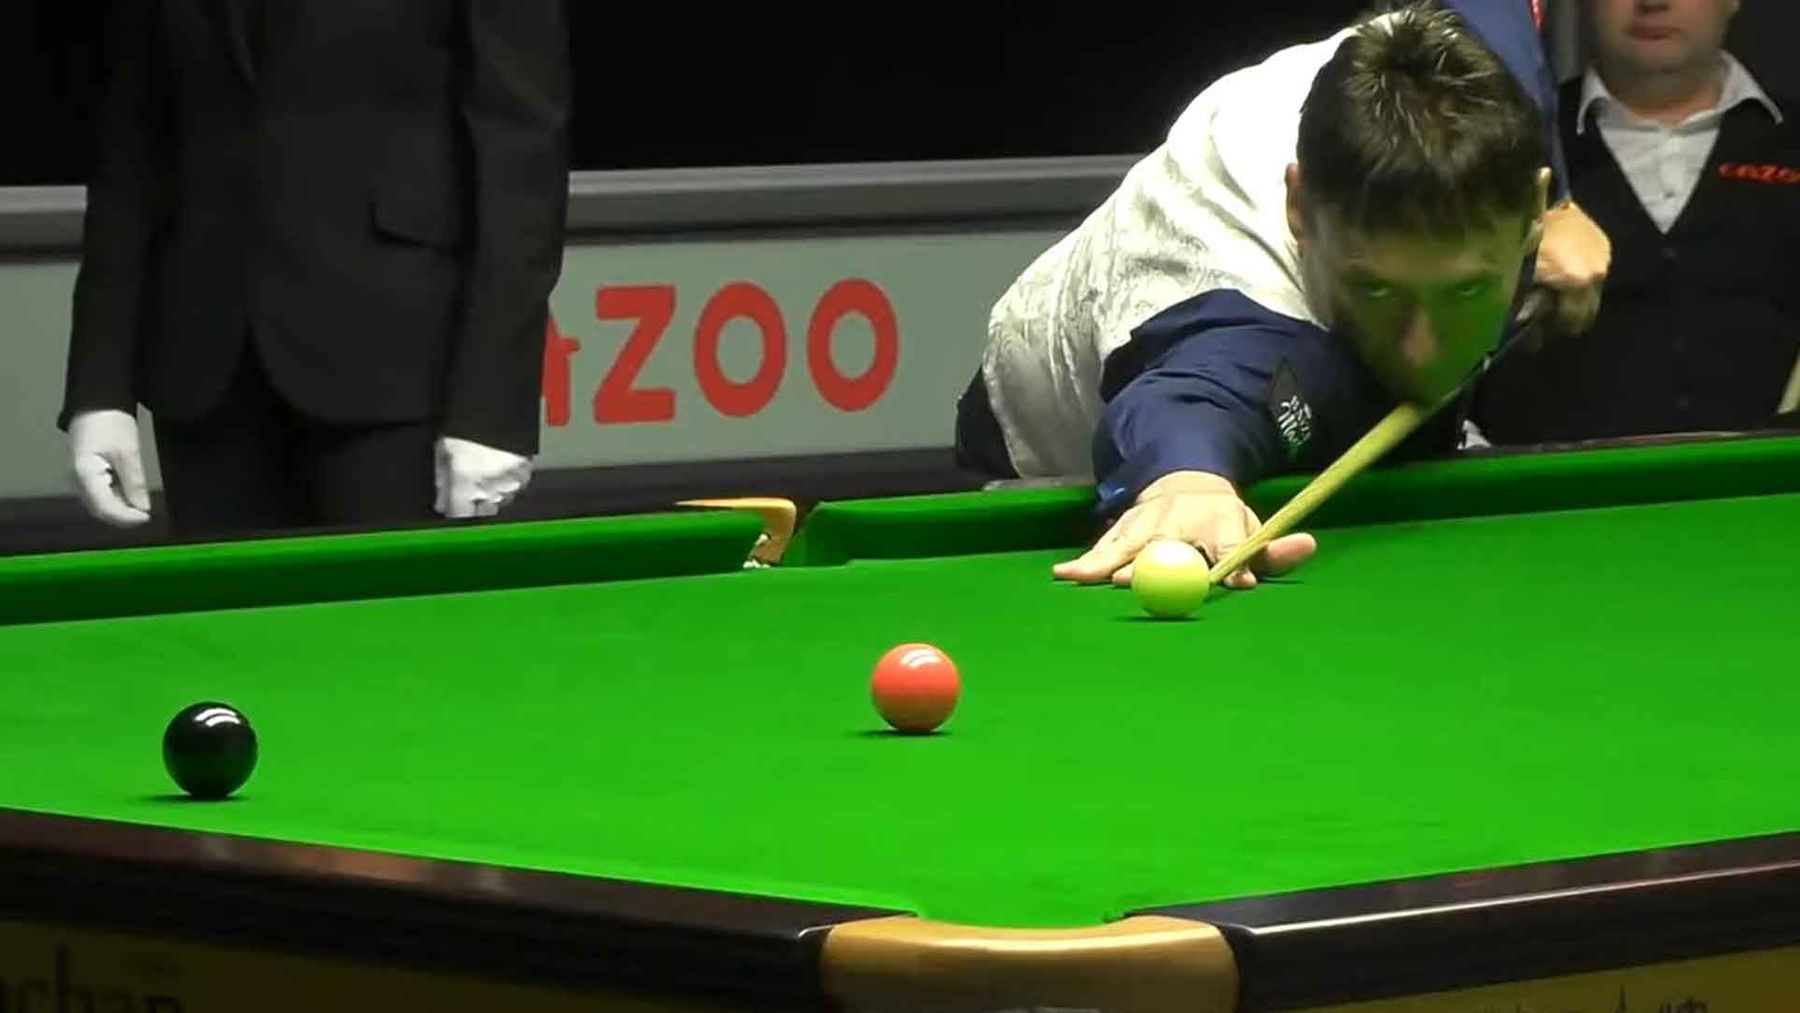 Snooker results Jimmy White beats Stephen Maguire to move one win away from the UK Championship